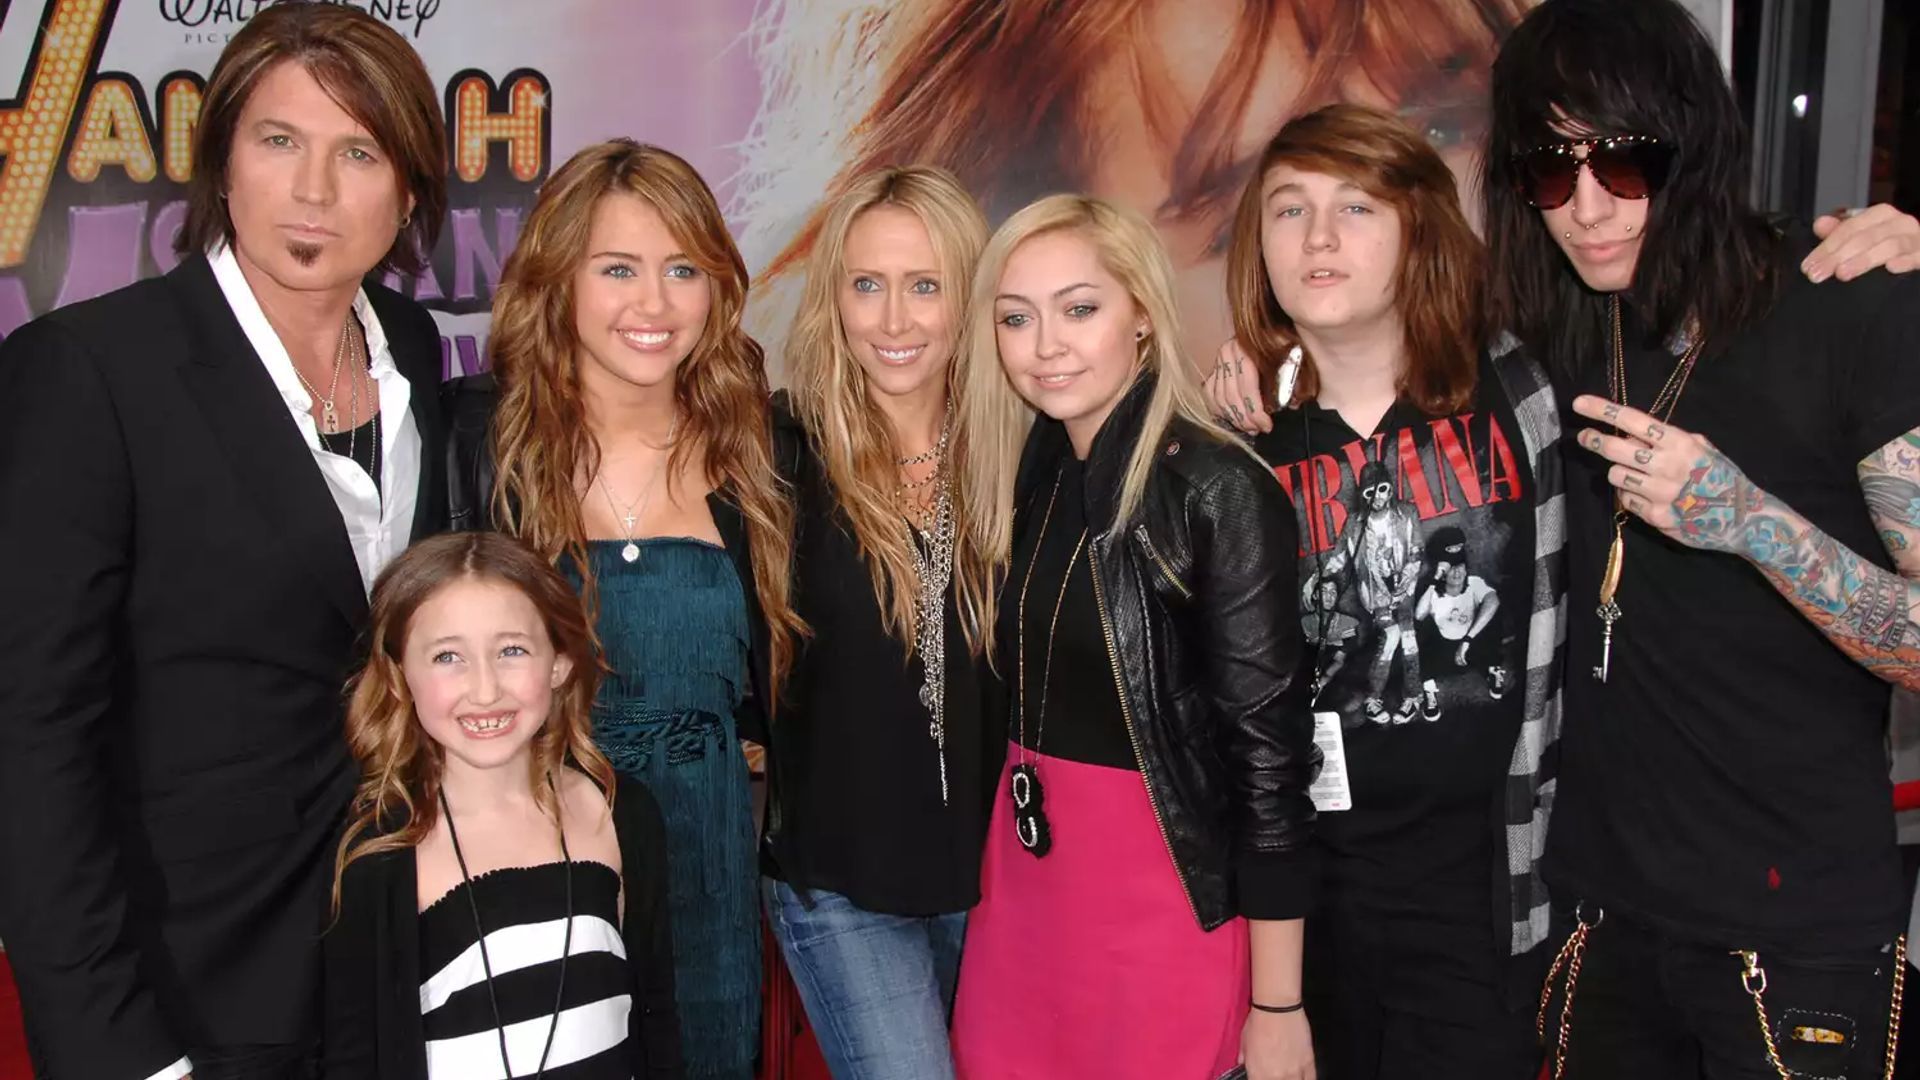 Meet Miley Cyrus' five siblings - everything you need to know